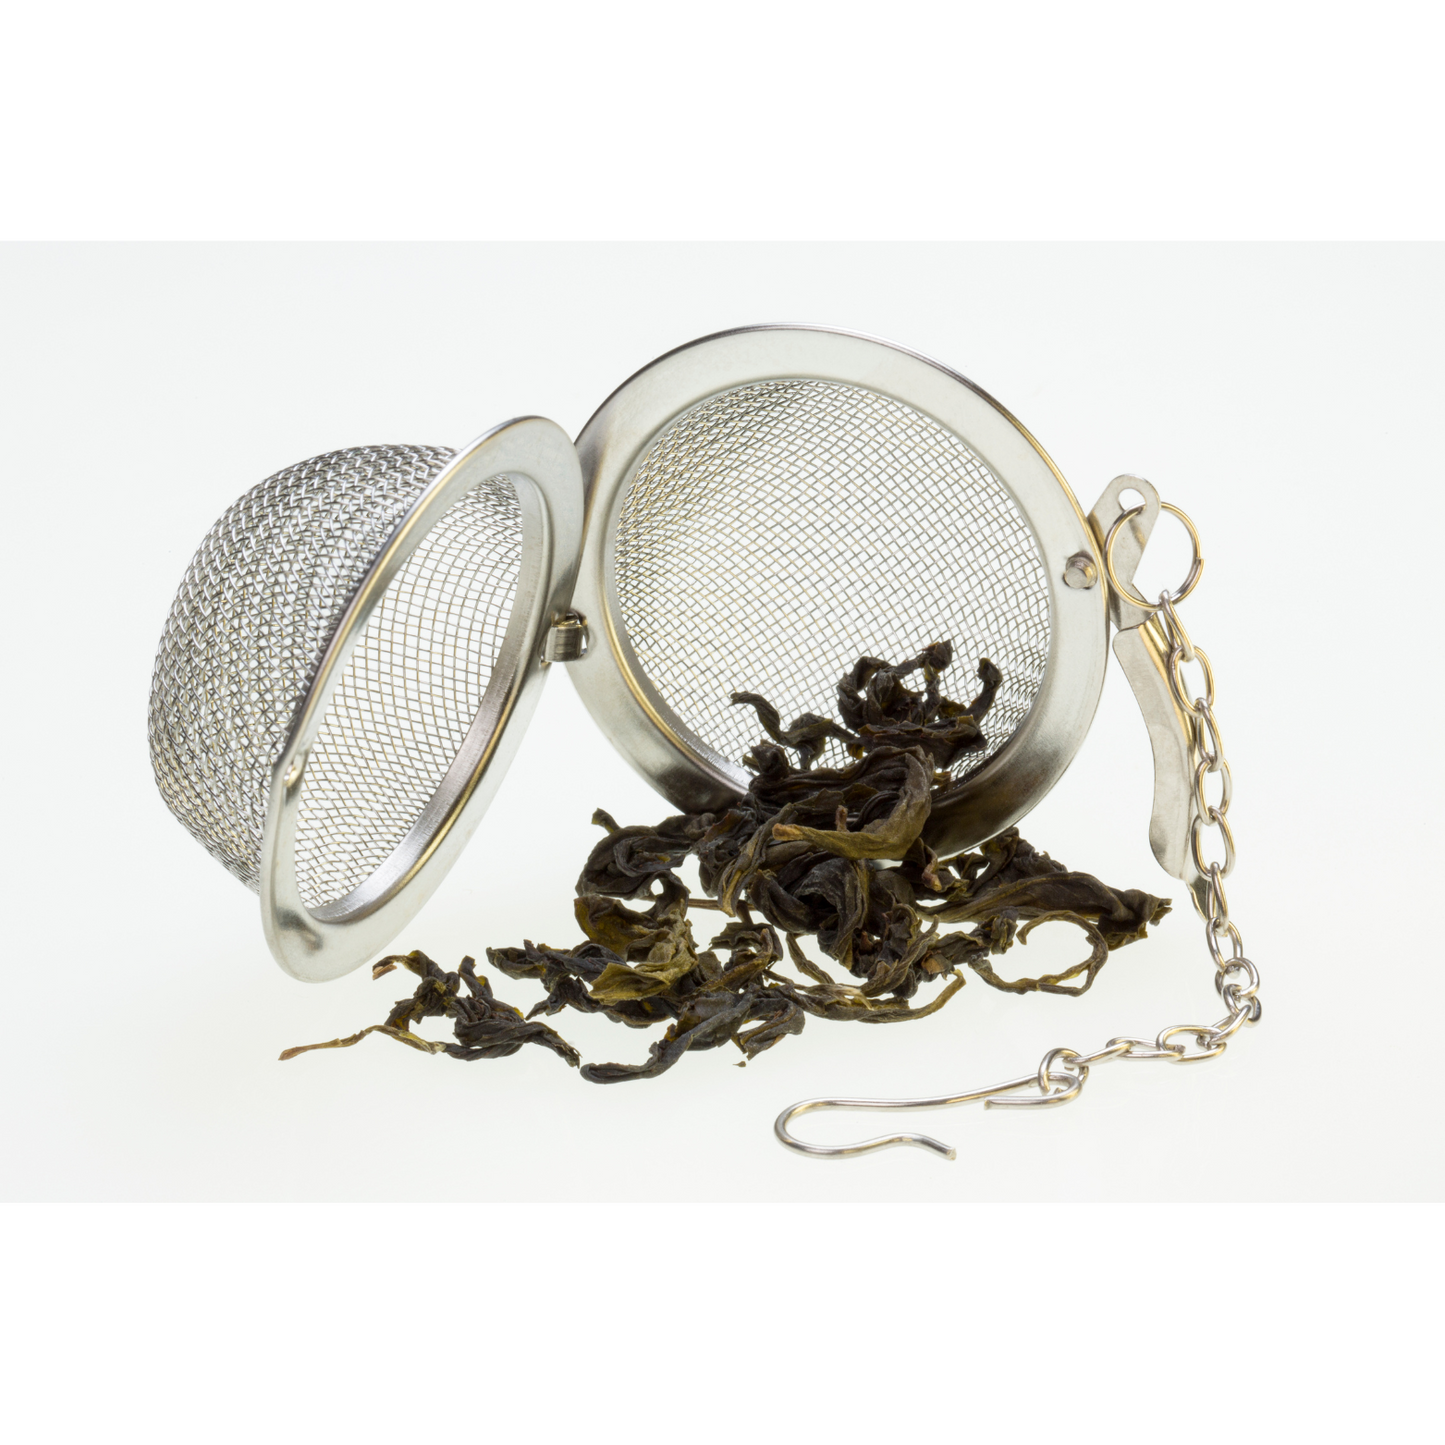 Witchy Pooh's Tea Infuser 2inch Mesh Ball for Brewing Loose Leaf Teas with FREE Wooden Spoon!!